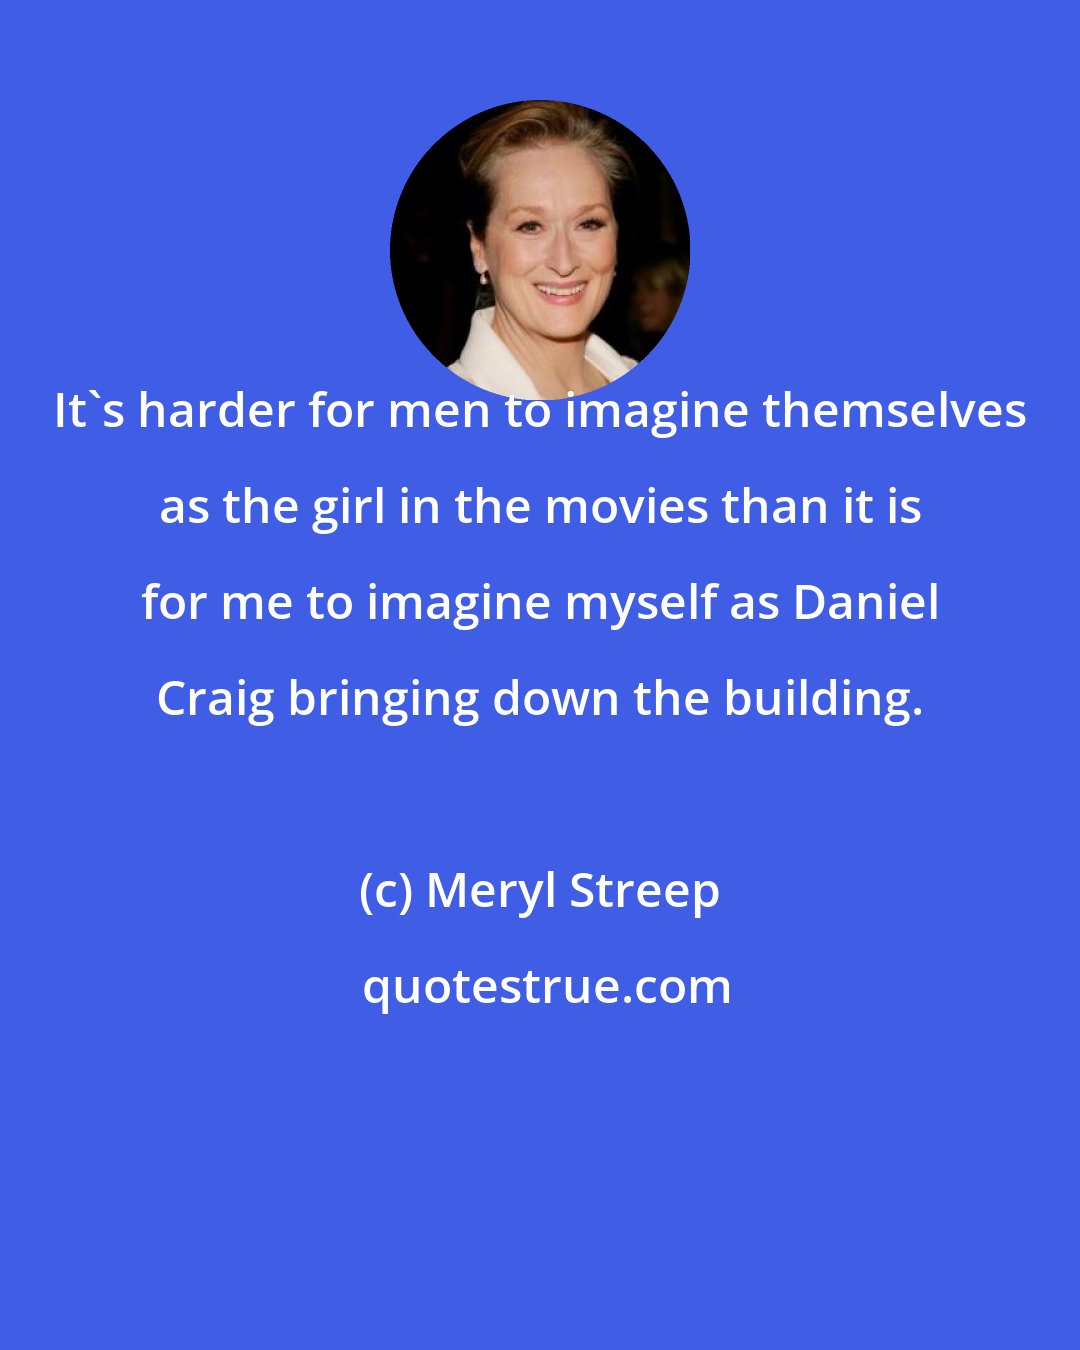 Meryl Streep: It's harder for men to imagine themselves as the girl in the movies than it is for me to imagine myself as Daniel Craig bringing down the building.